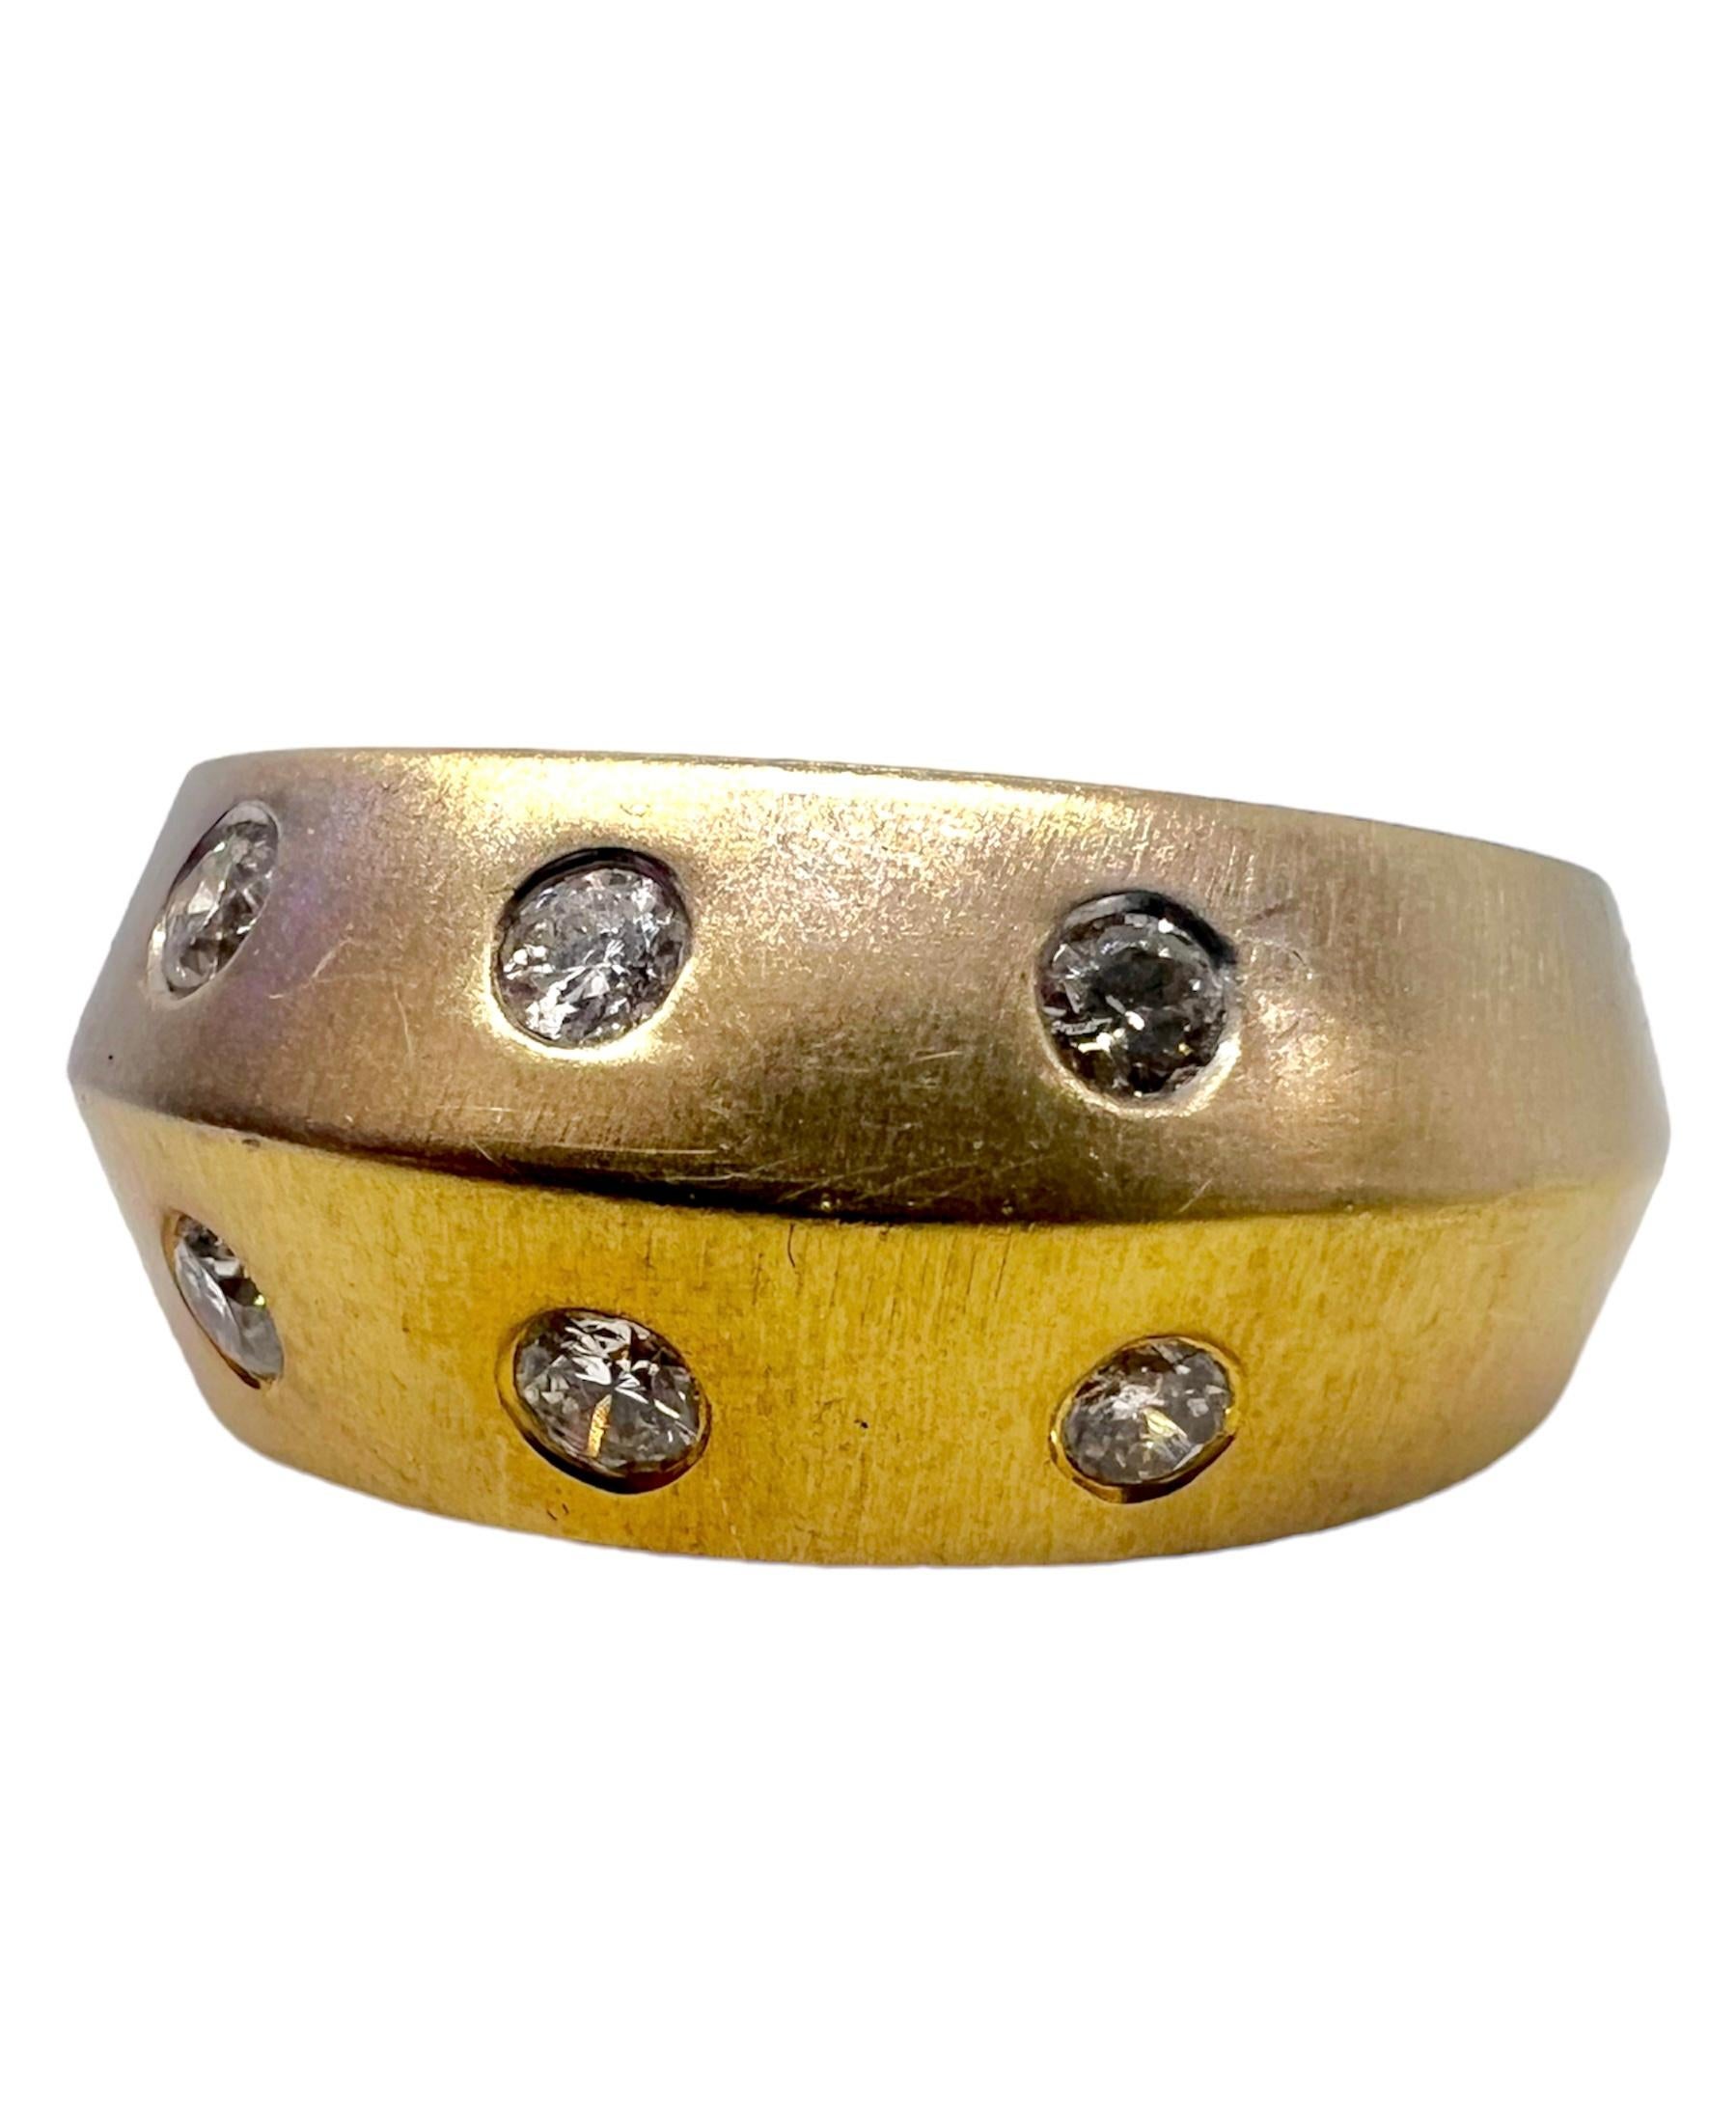 18K yellow gold ring with 8 small round diamonds.

Sophia D by Joseph Dardashti LTD has been known worldwide for 35 years and are inspired by classic Art Deco design that merges with modern manufacturing techniques. 